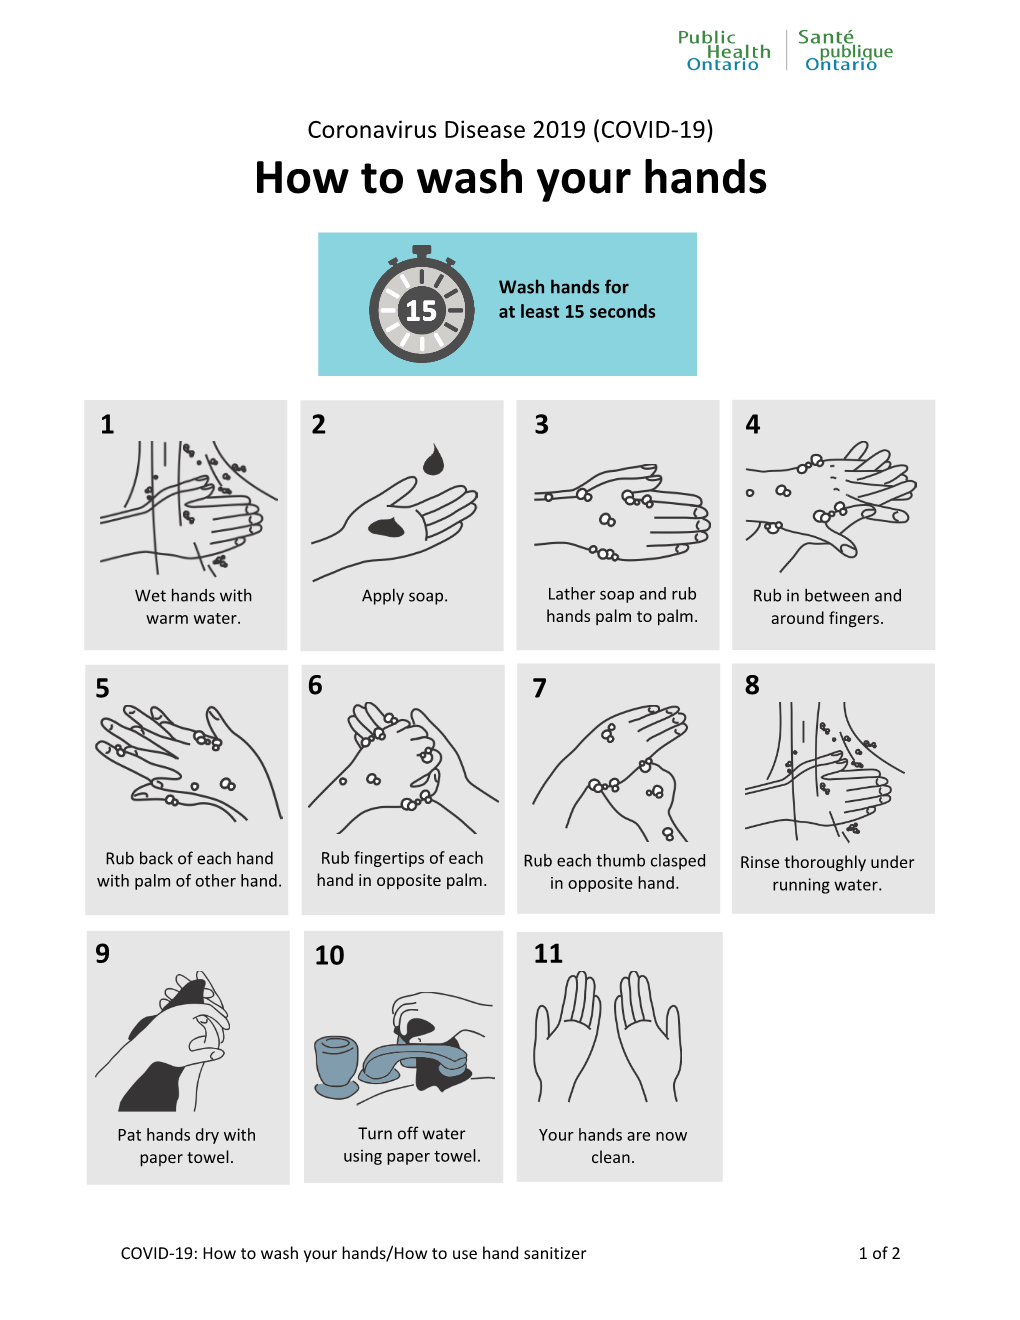 (COVID-19) How to Wash Your Hands